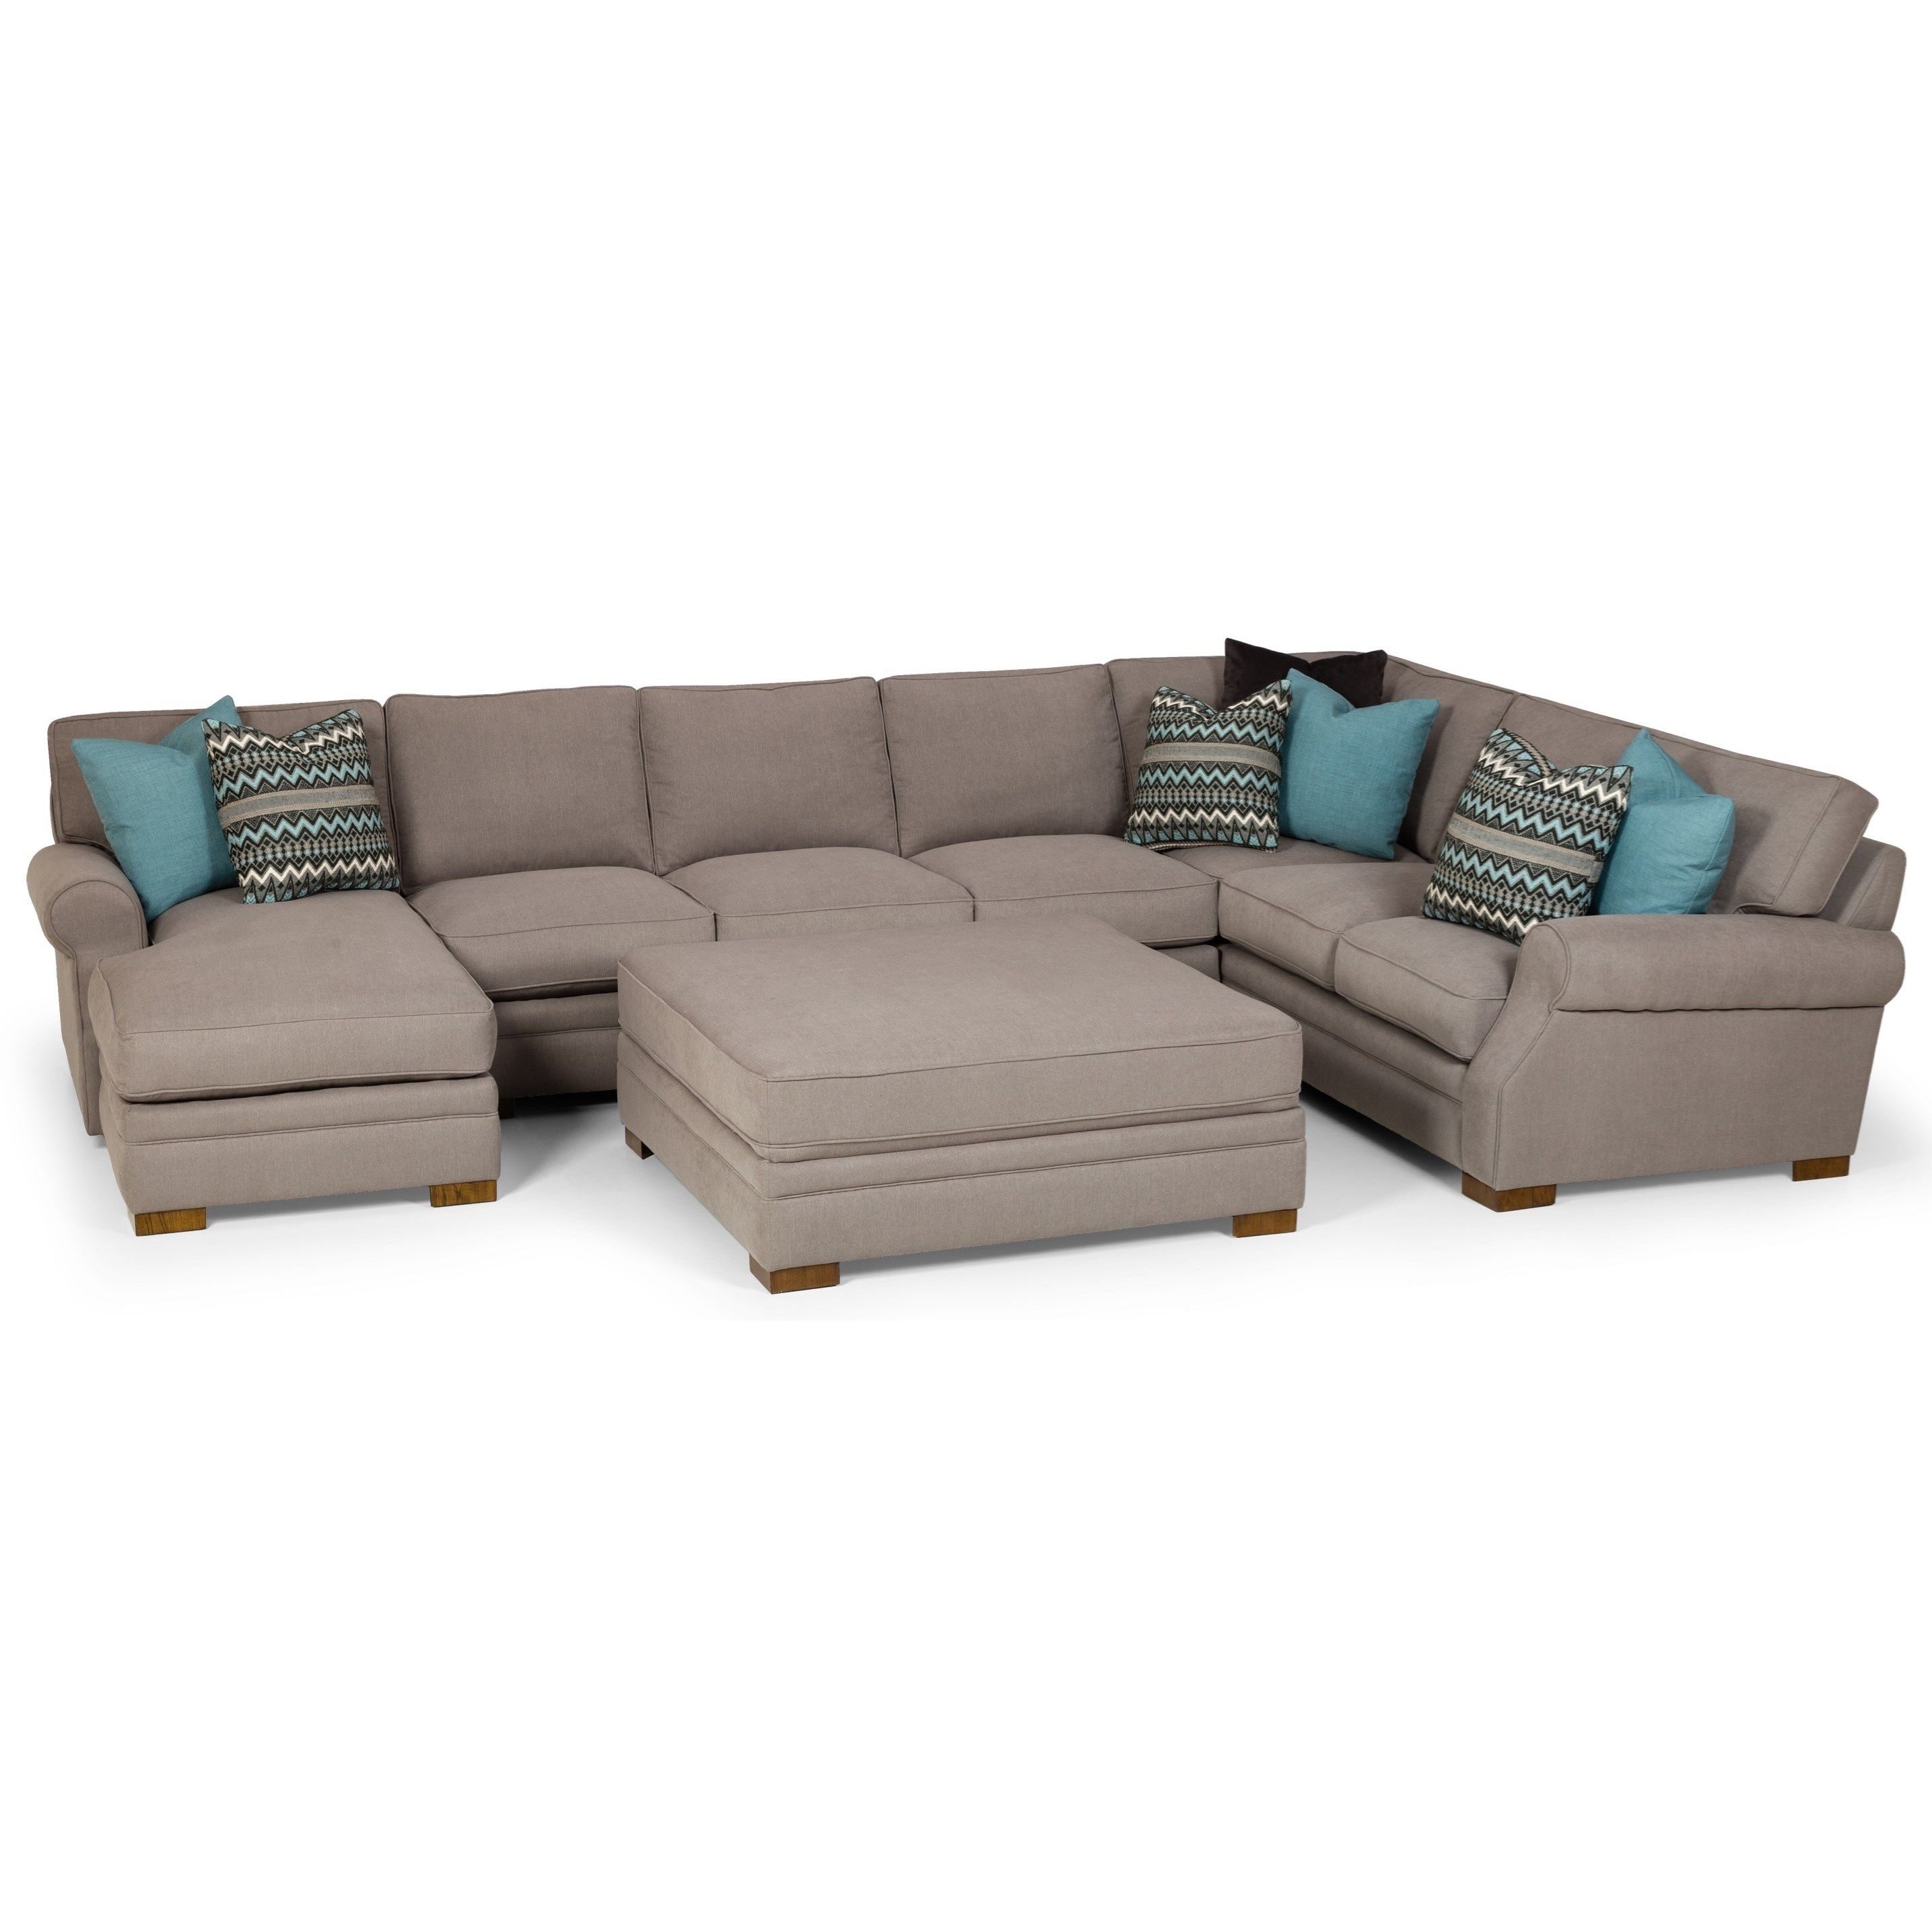 Sunset Home 525 6 Seat U Shape Sectional Sofa With Laf Chaise | Sadler'S  Home Furnishings | Sectional Sofas Regarding 6 Seater Sectional Couches (Photo 9 of 15)